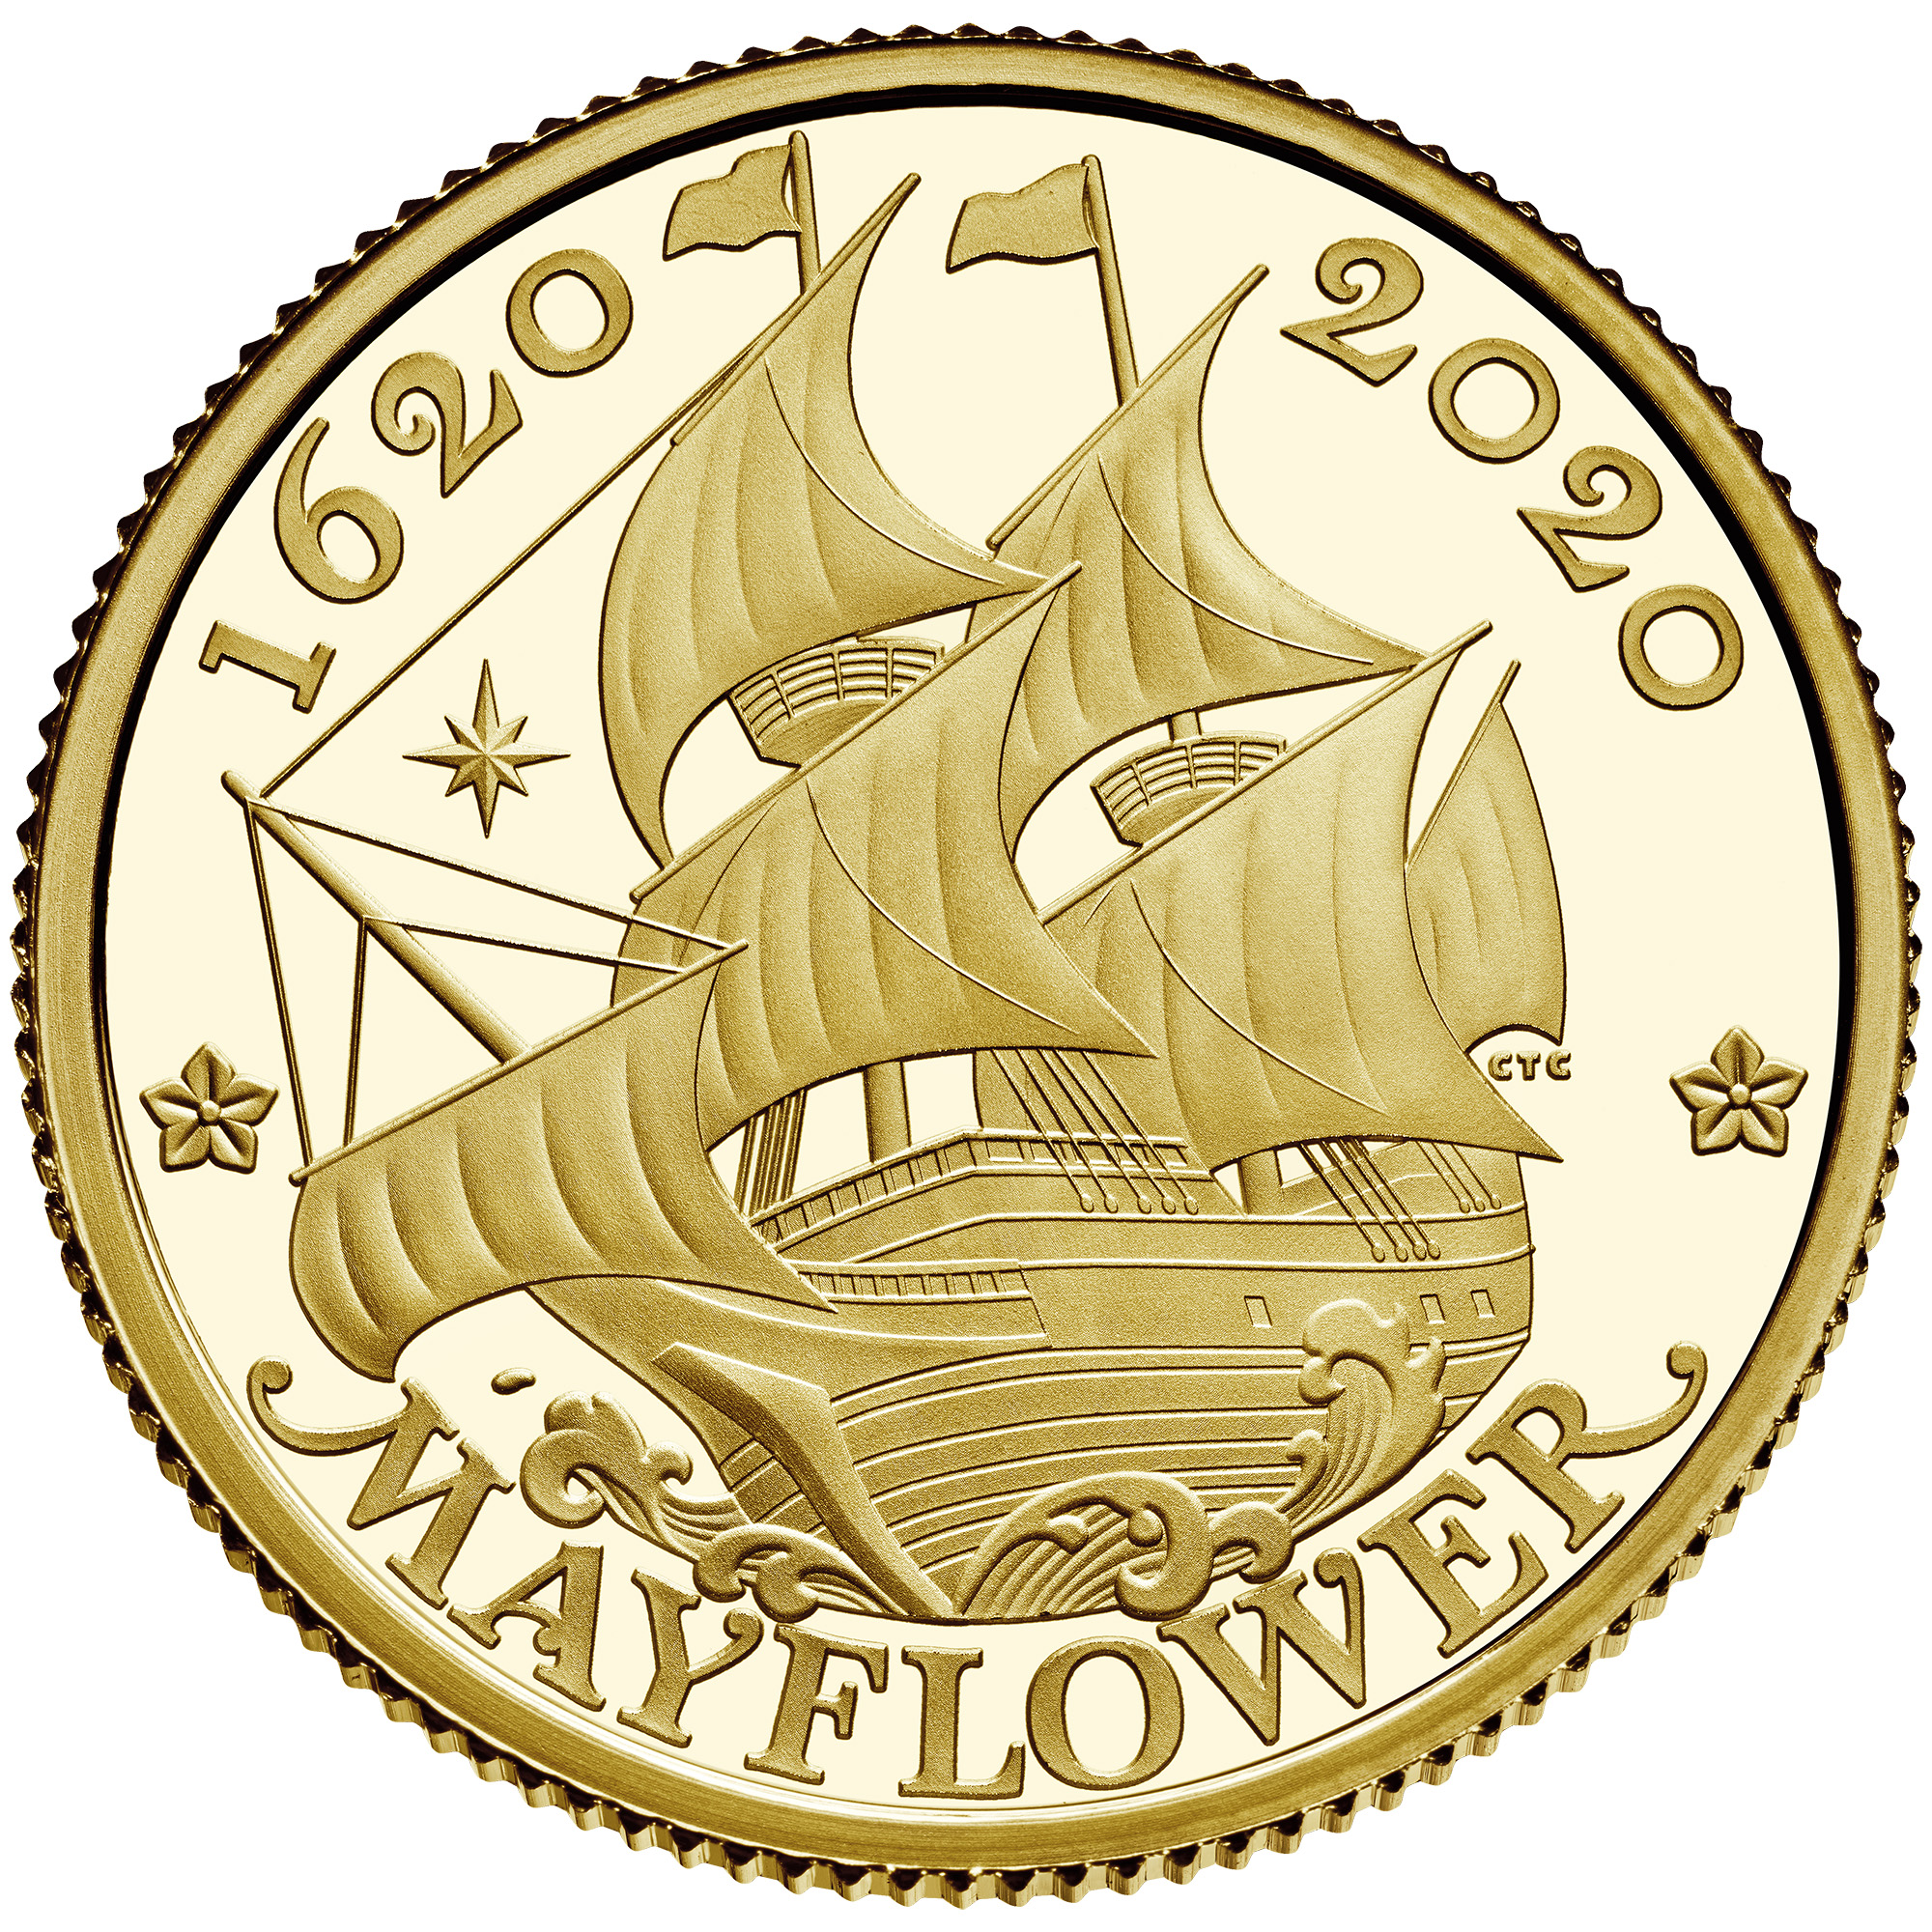 enlarged image for Mayflower 400th Anniversary Products Available from the US Mint on November 17